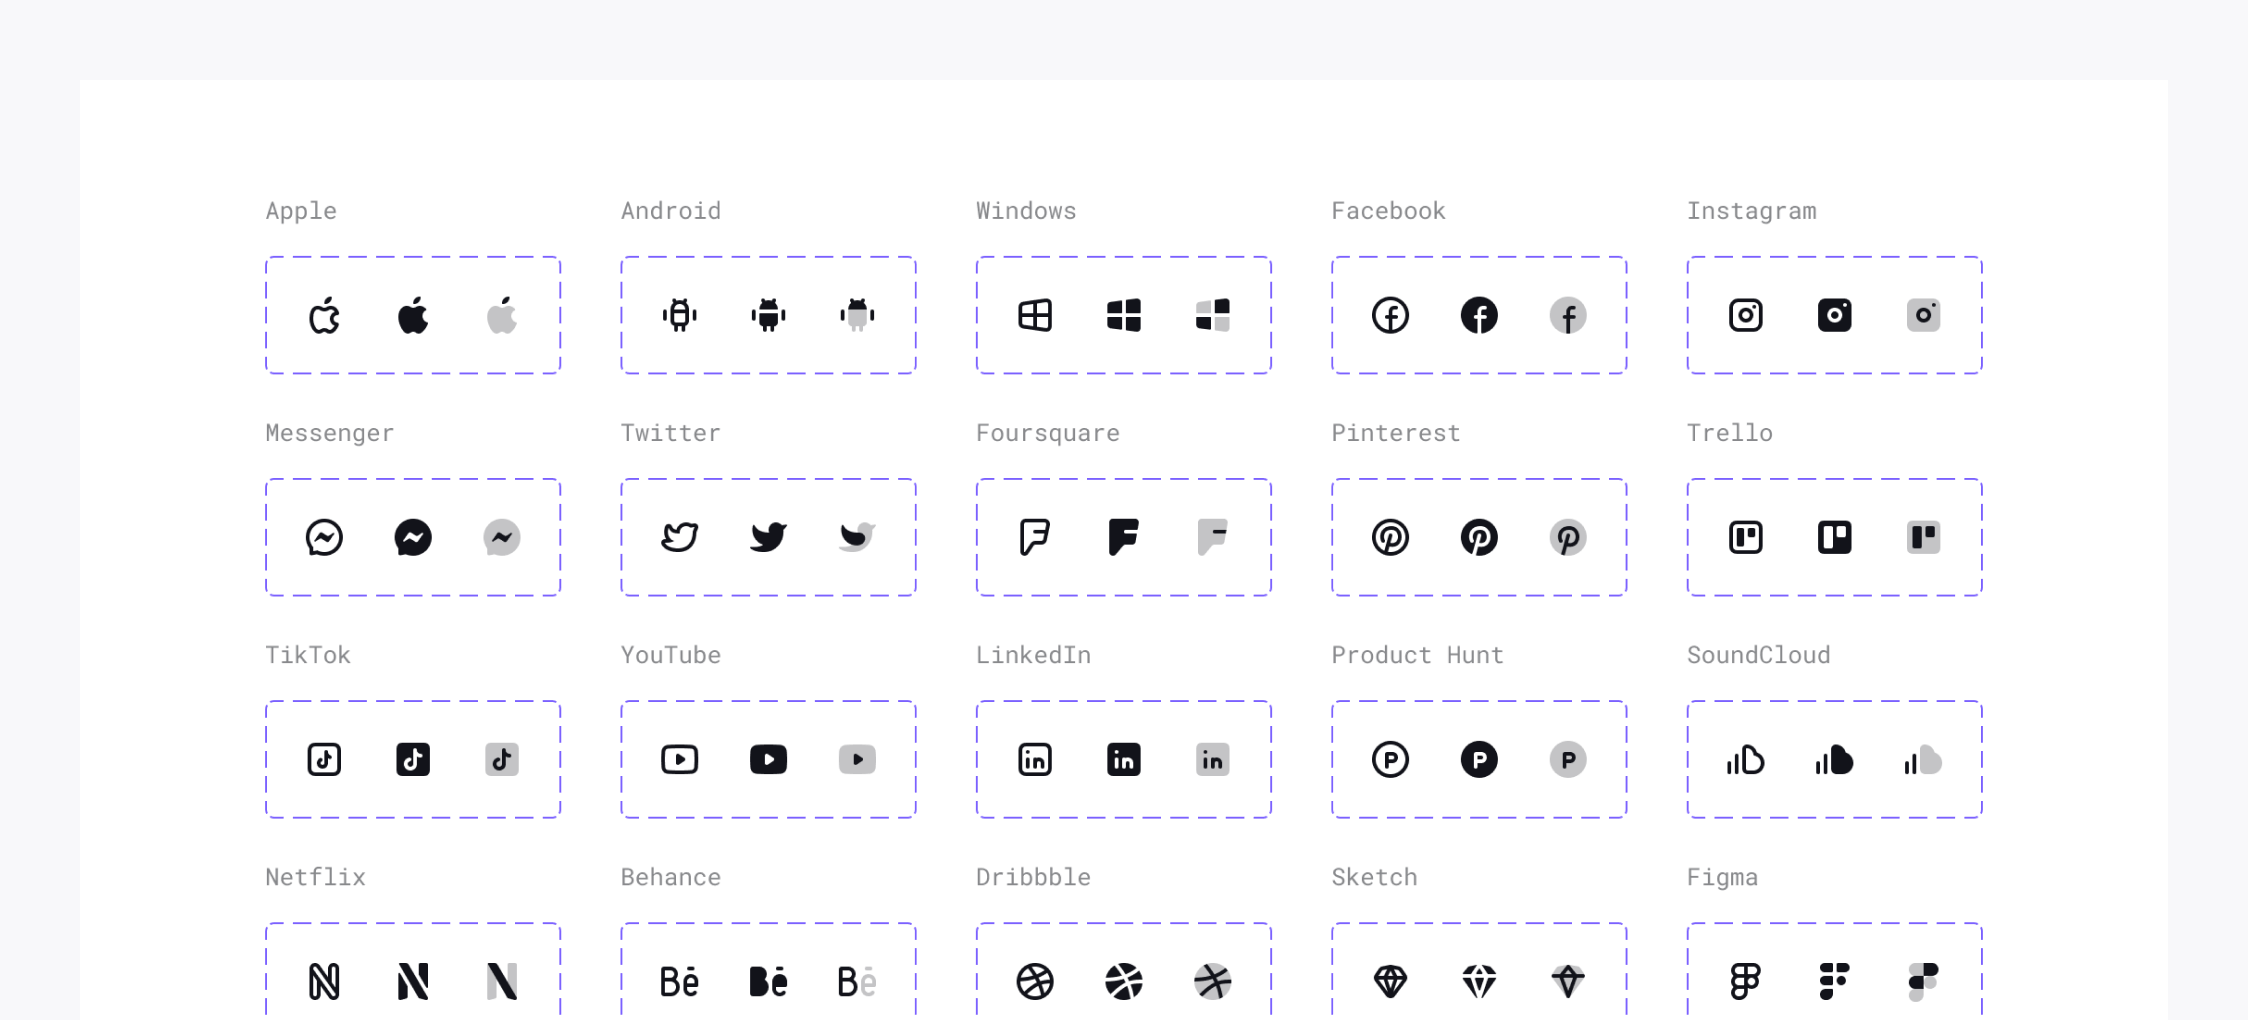 Social Media and Brands icon set in Universal Icon Set in Figma. Icons for various brands and social media platforms, including Apple, Android, Windows, Facebook, Instagram, Messenger, Twitter, Foursquare, Pinterest, Trello, TikTok, YouTube, LinkedIn, Product Hunt, SoundCloud, Netflix, Behance, Dribbble, Sketch, and Figma.